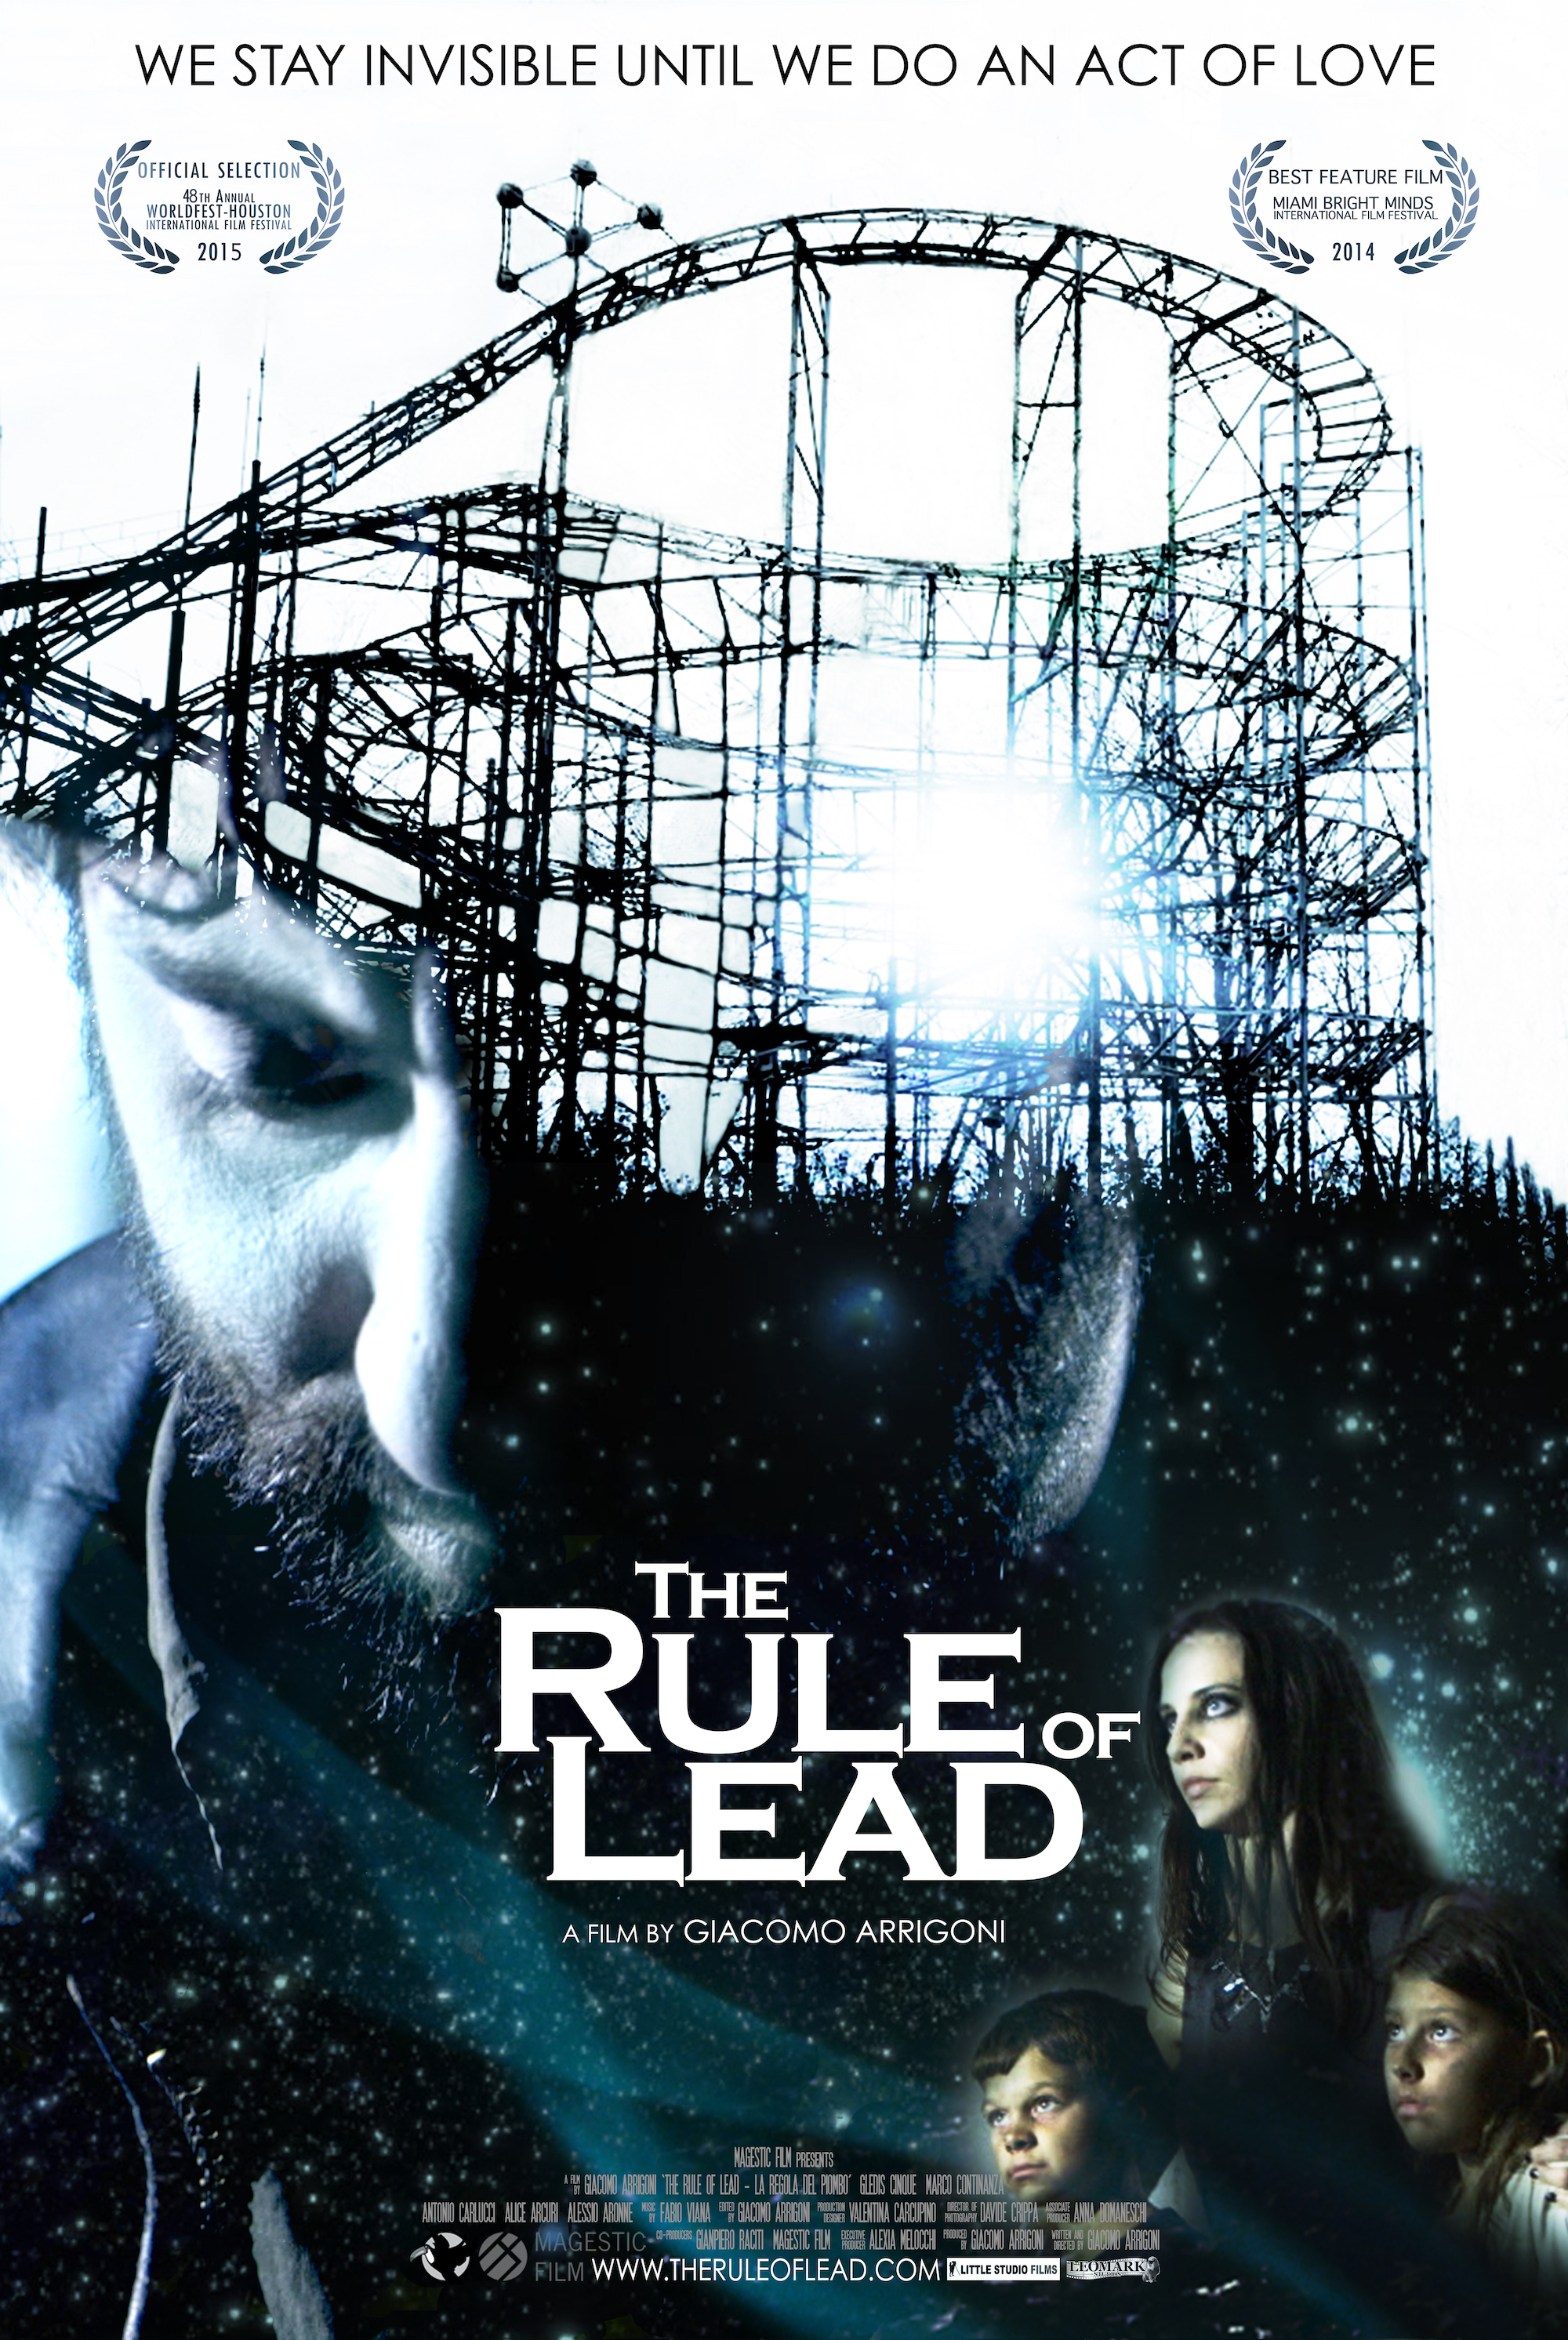 The Rule of Lead